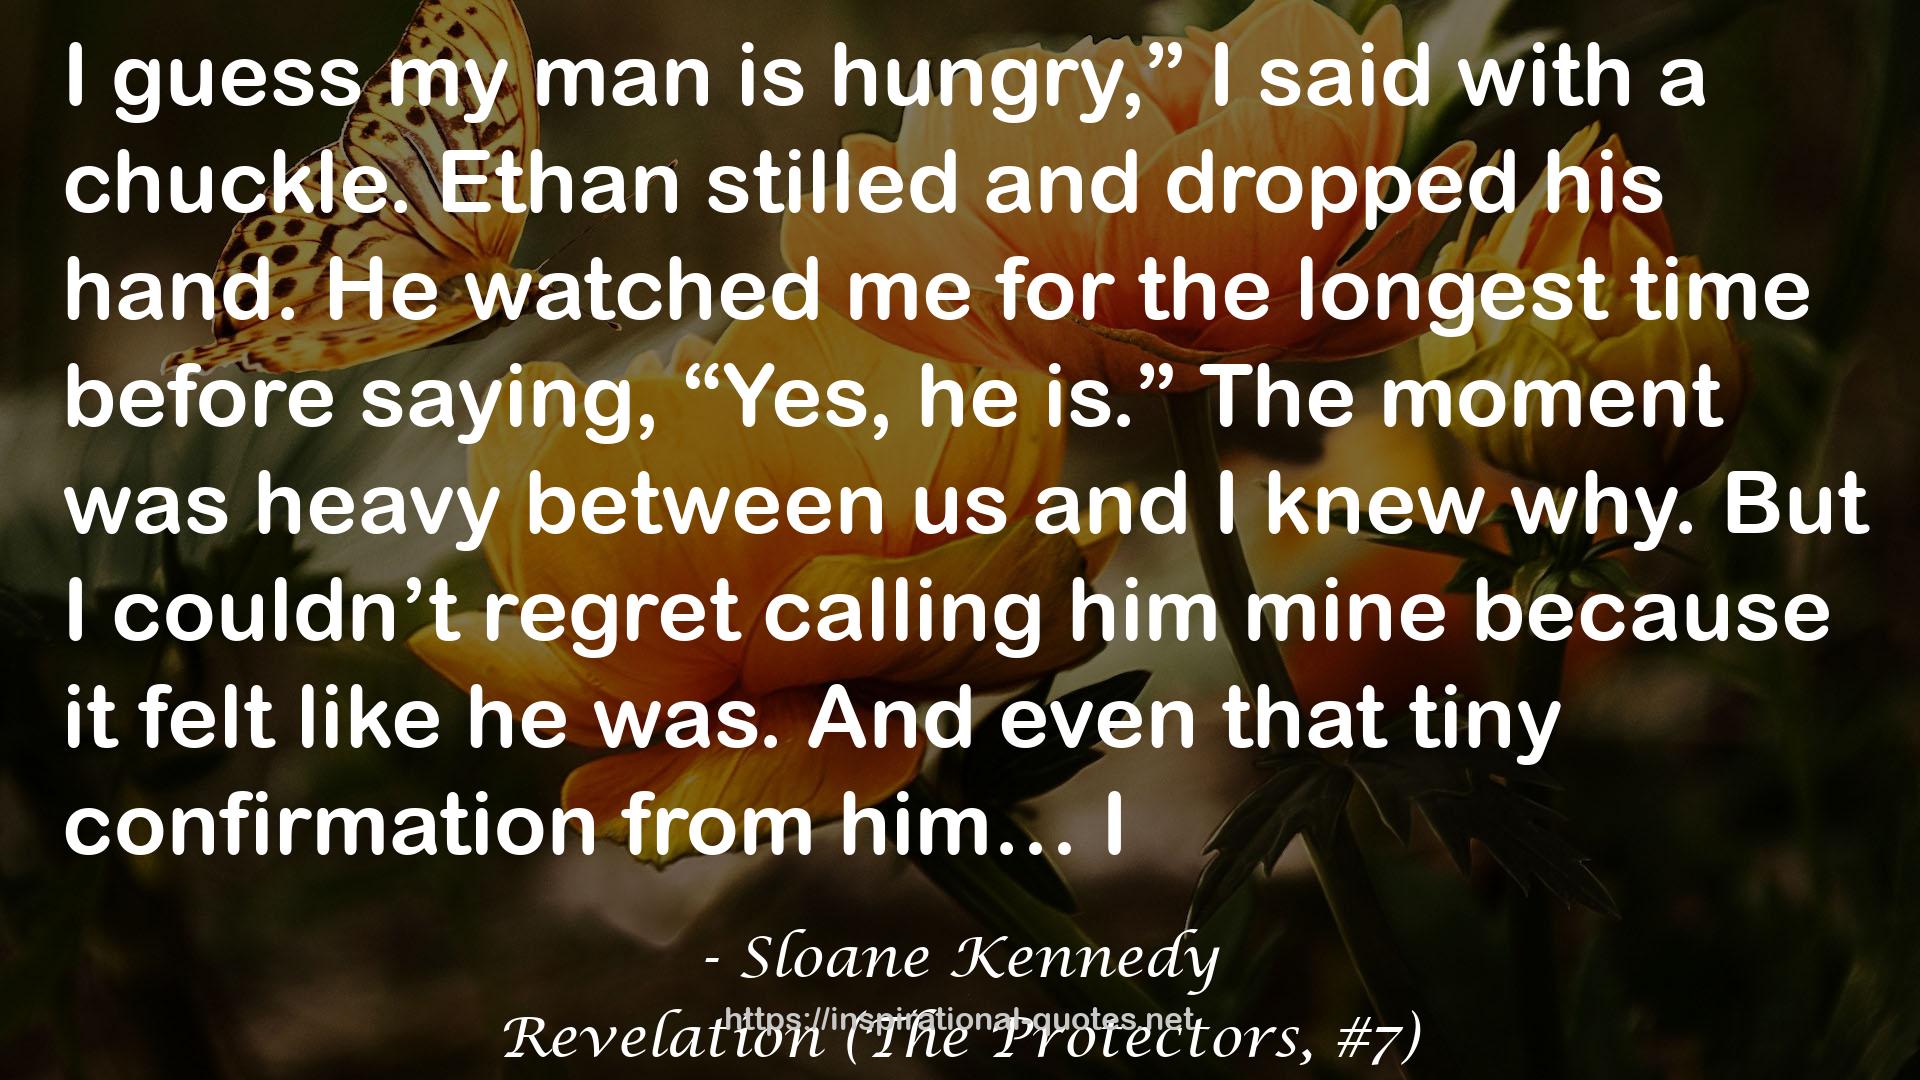 Revelation (The Protectors, #7) QUOTES